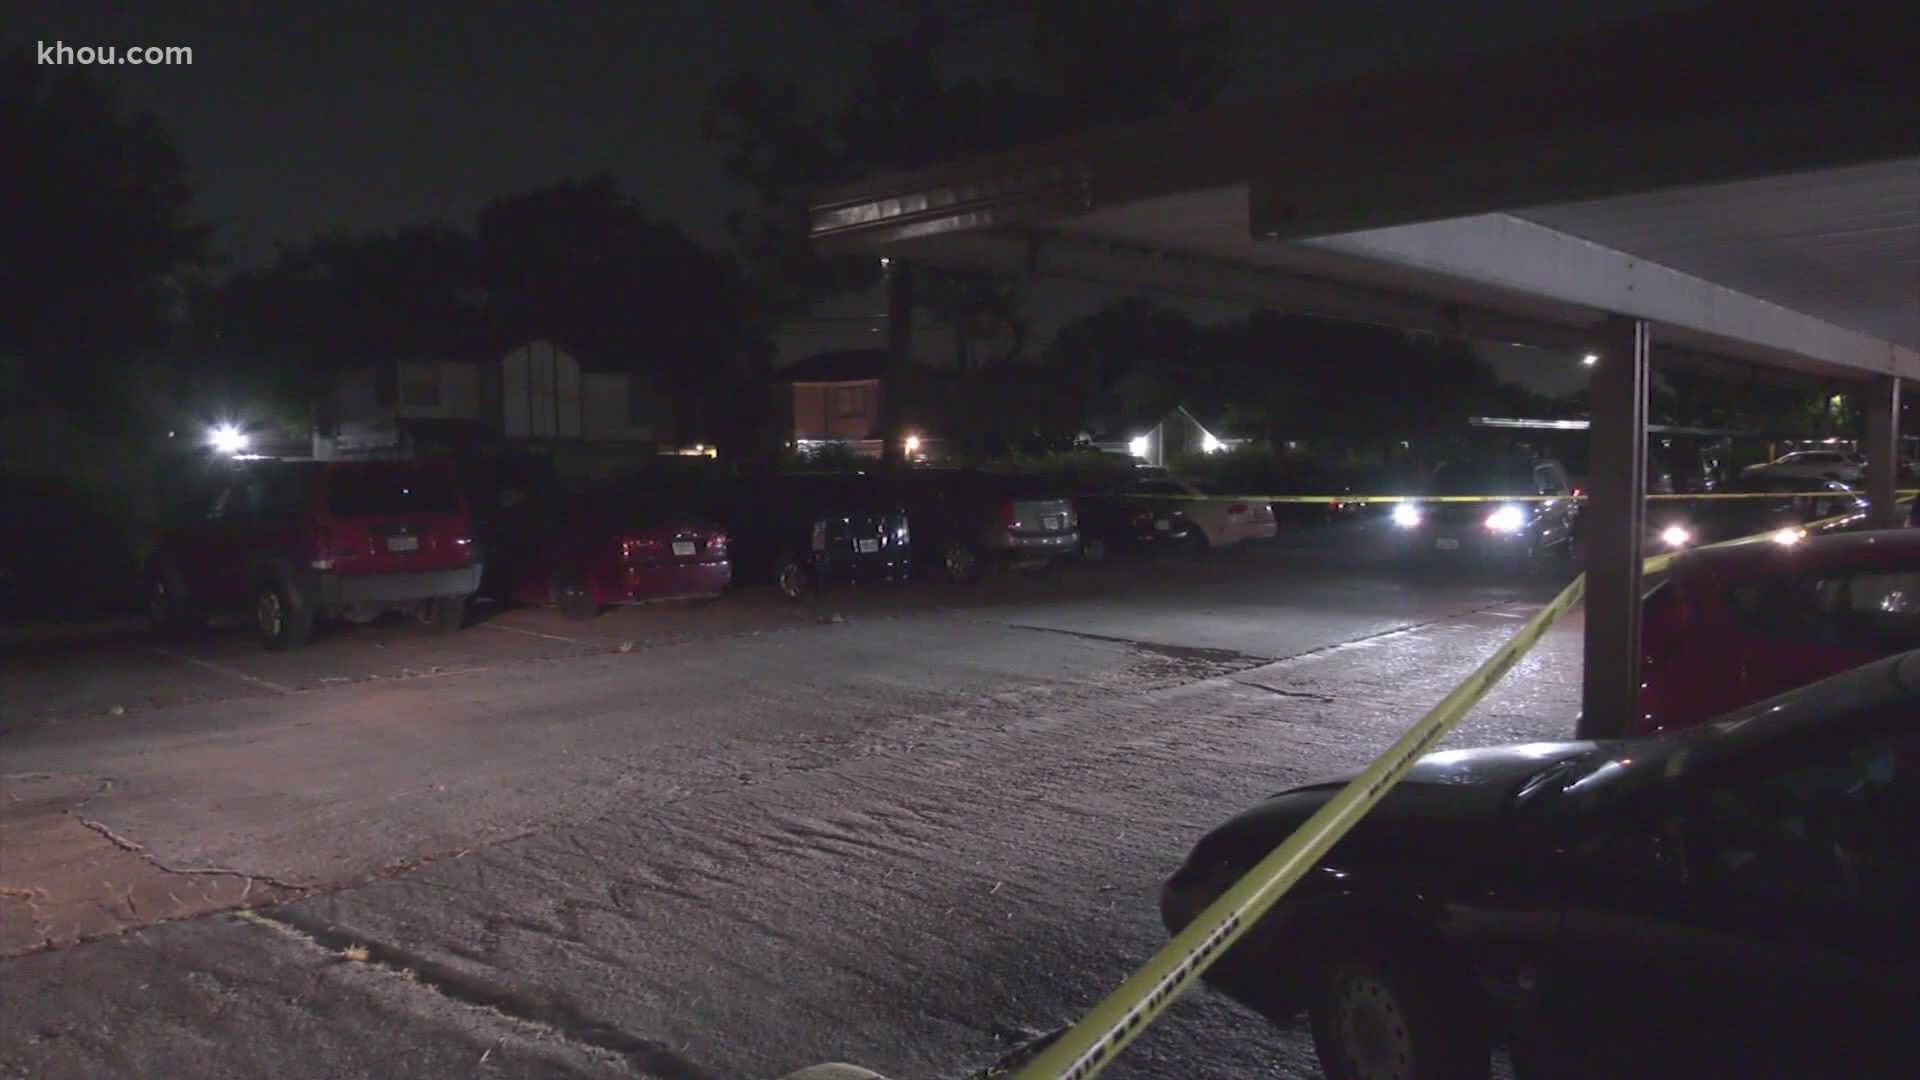 Local police investigating shooting in southwest Houston after man arrives at hospital with fatal gunshot wound.